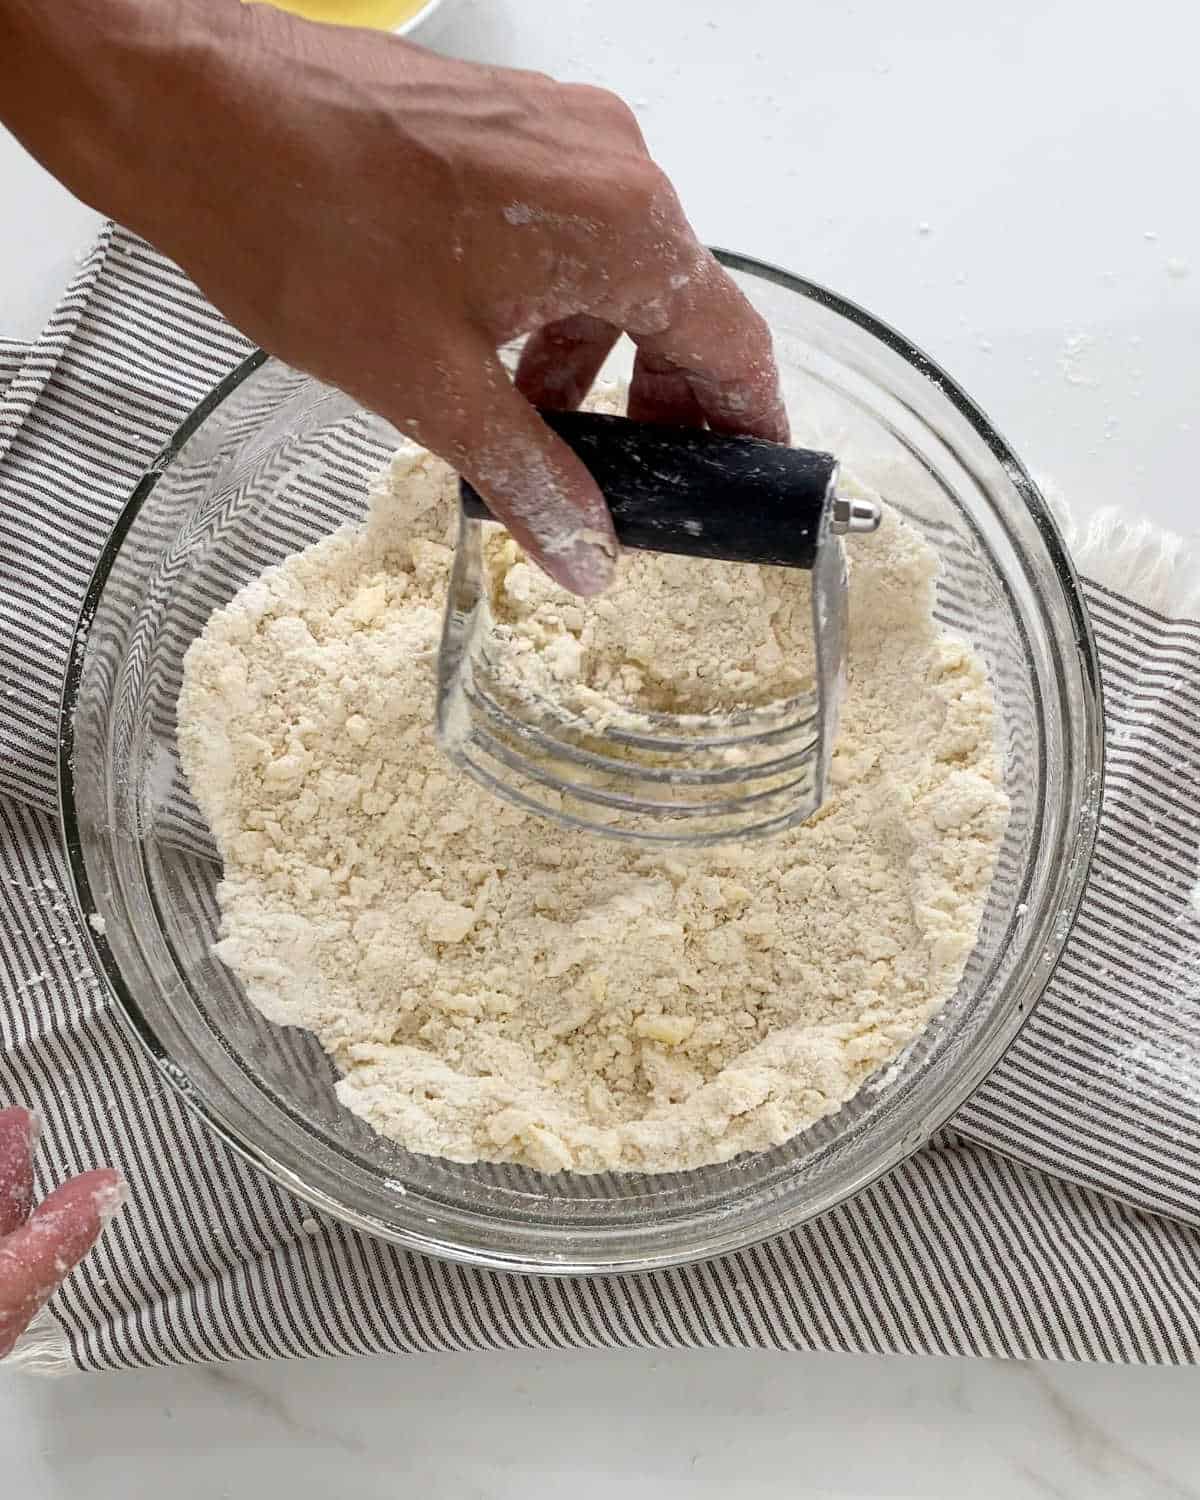 Cutting scone dough in a glass bowl with a pastry cutter. White marble and striped cloth beneath the bowl. 